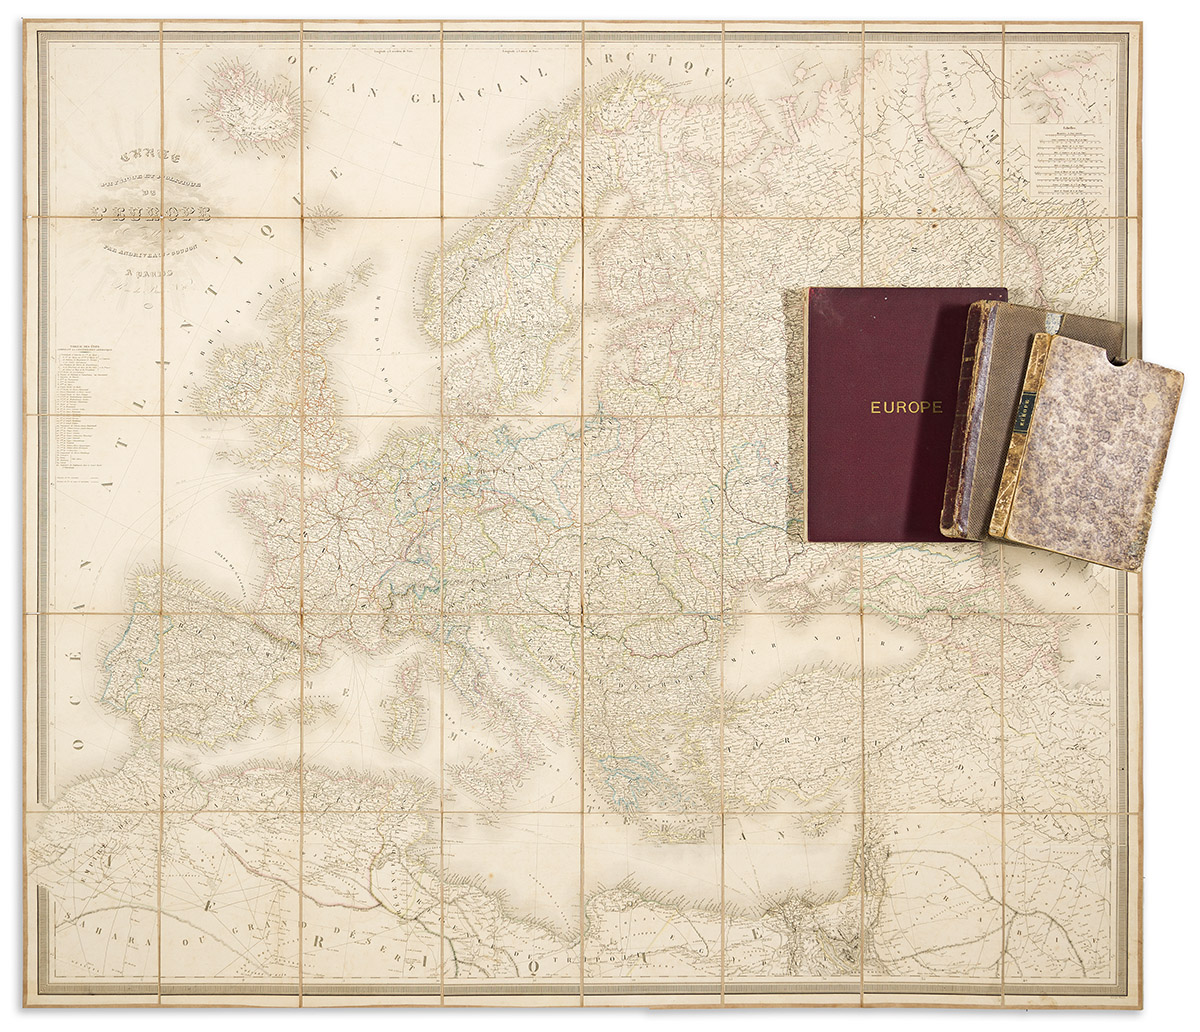 Maps & Atlases, Natural History & Color Plate Books — Swann Galleries